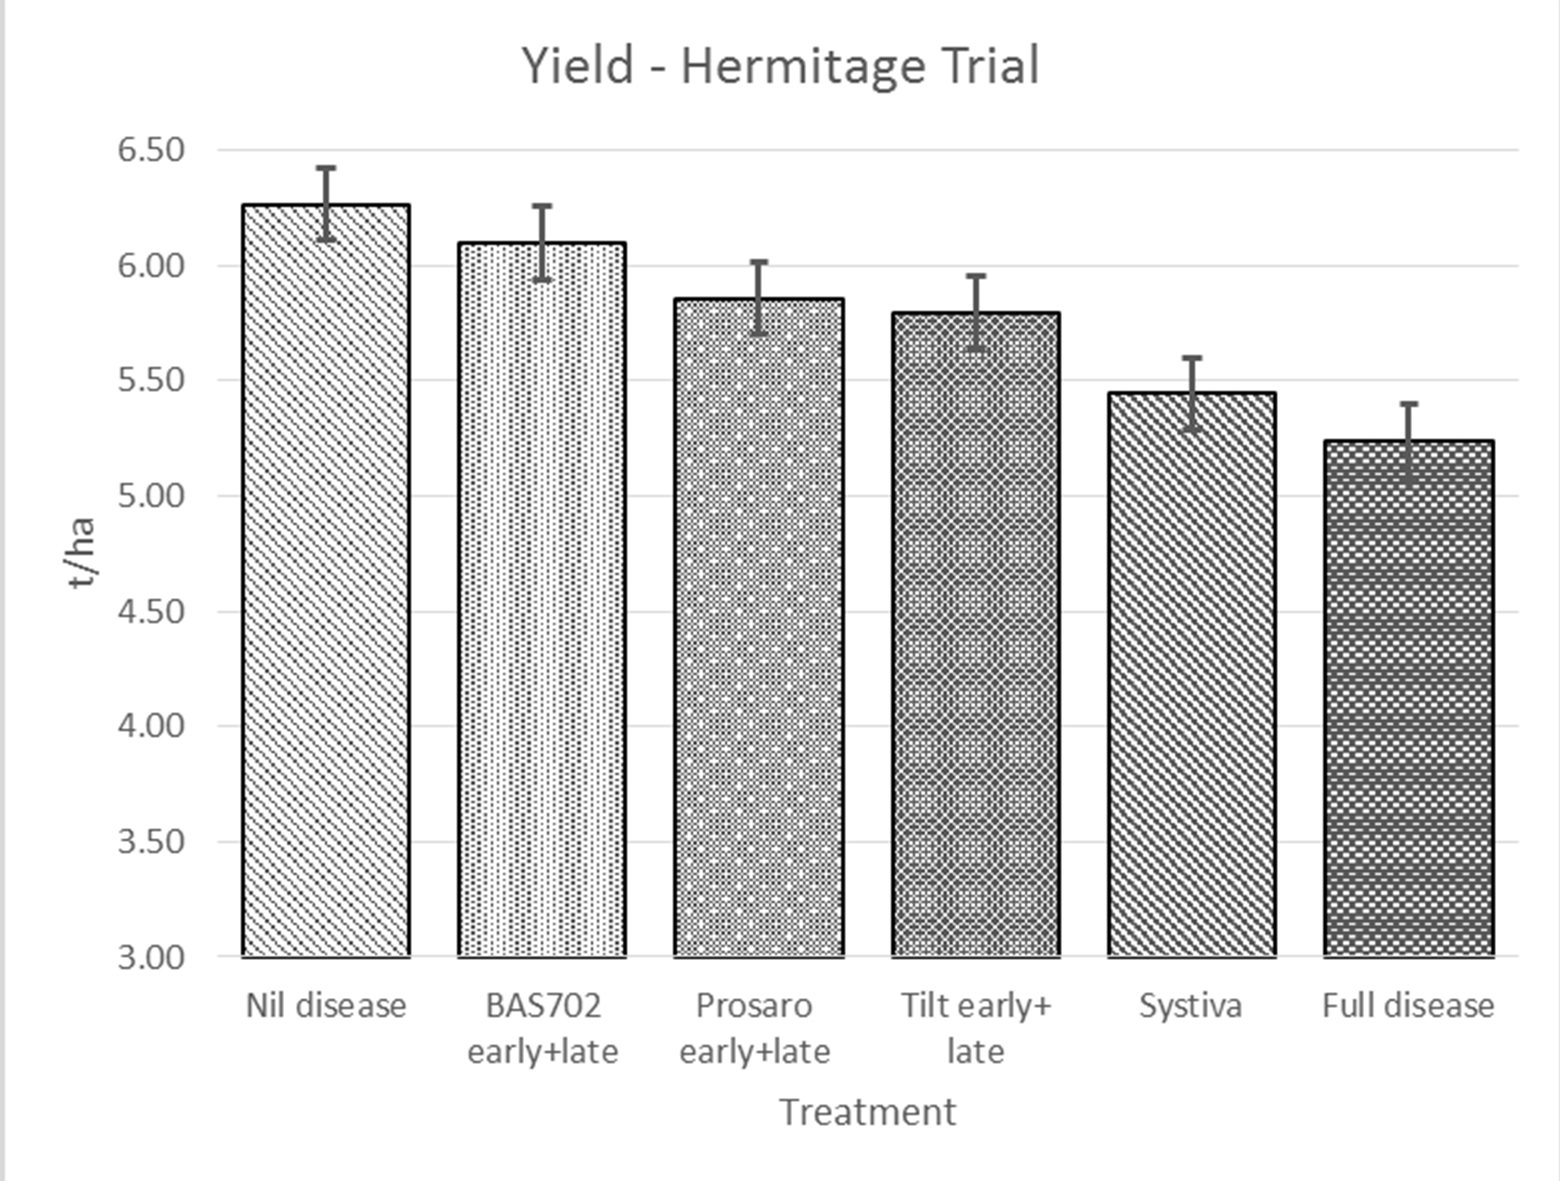 Figure 1:  Yields of Shepherd barley under different fungicide treatments to control spot form of net blotch.